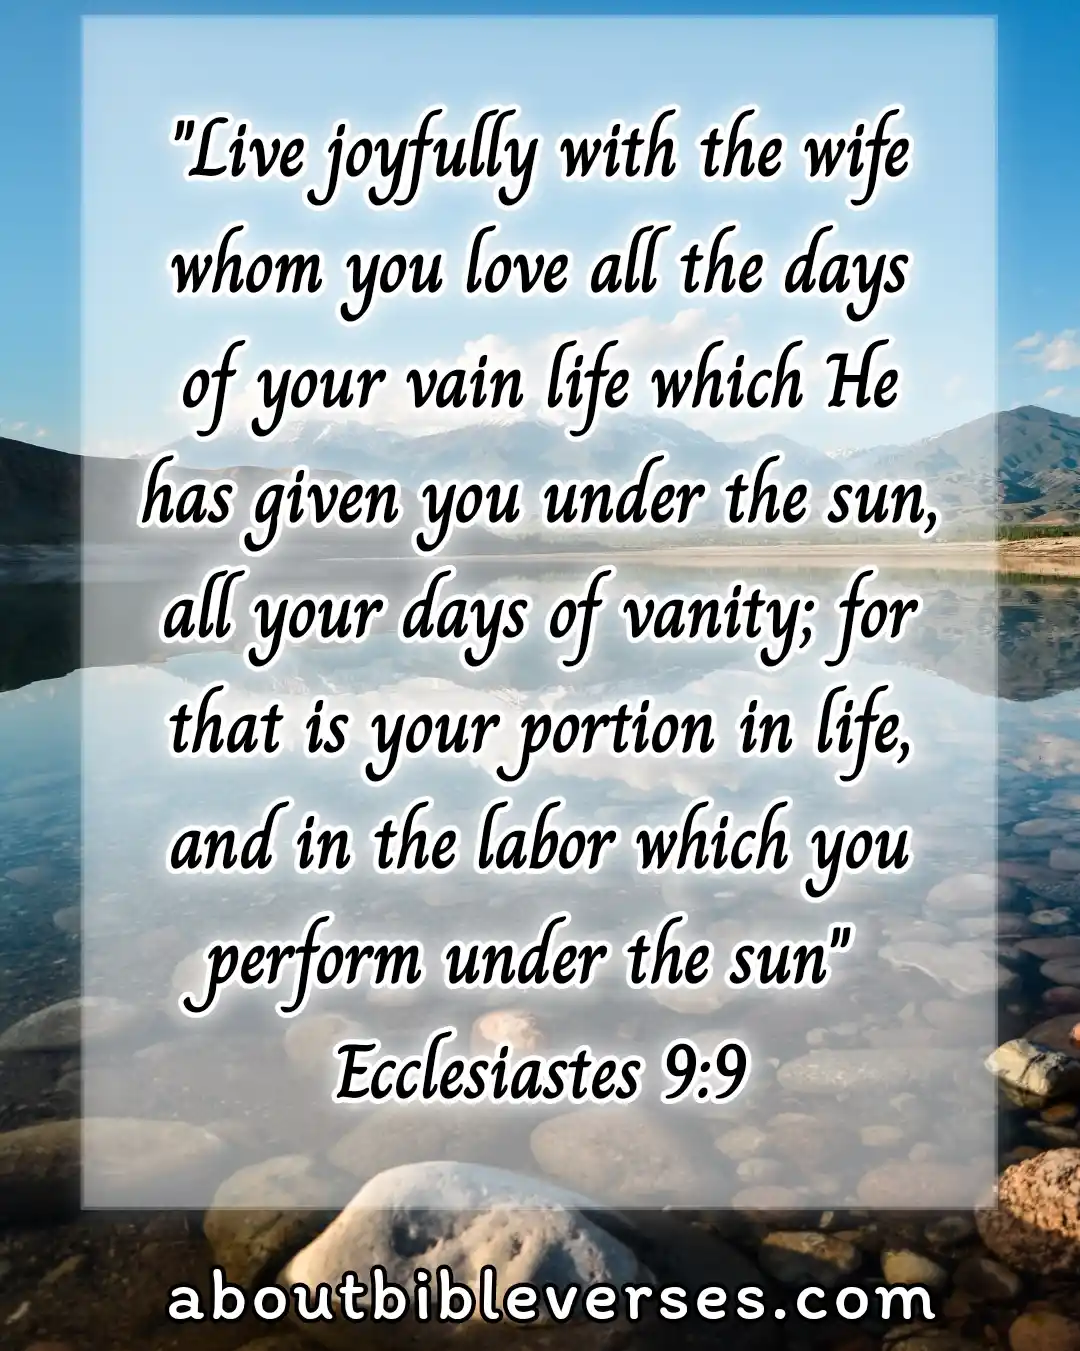 bible verses husband and wife relationship (Ecclesiastes 9:9)